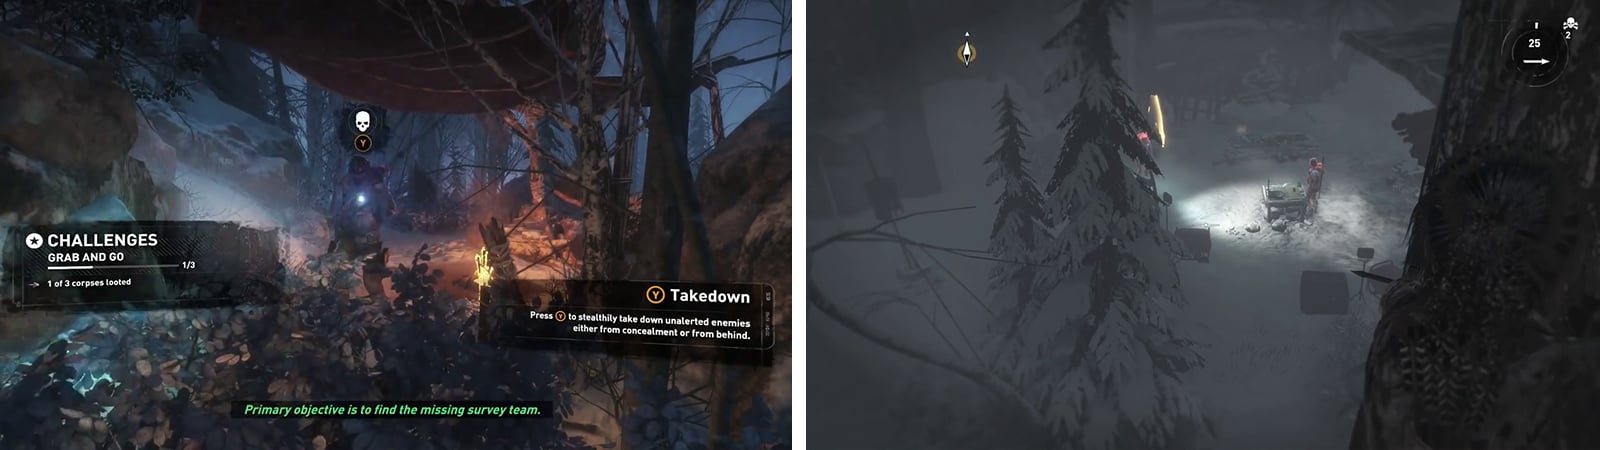 Hide in the bushes to takedown enemies (left). Use the bushes and tree branches to observe enemy patterns (right).